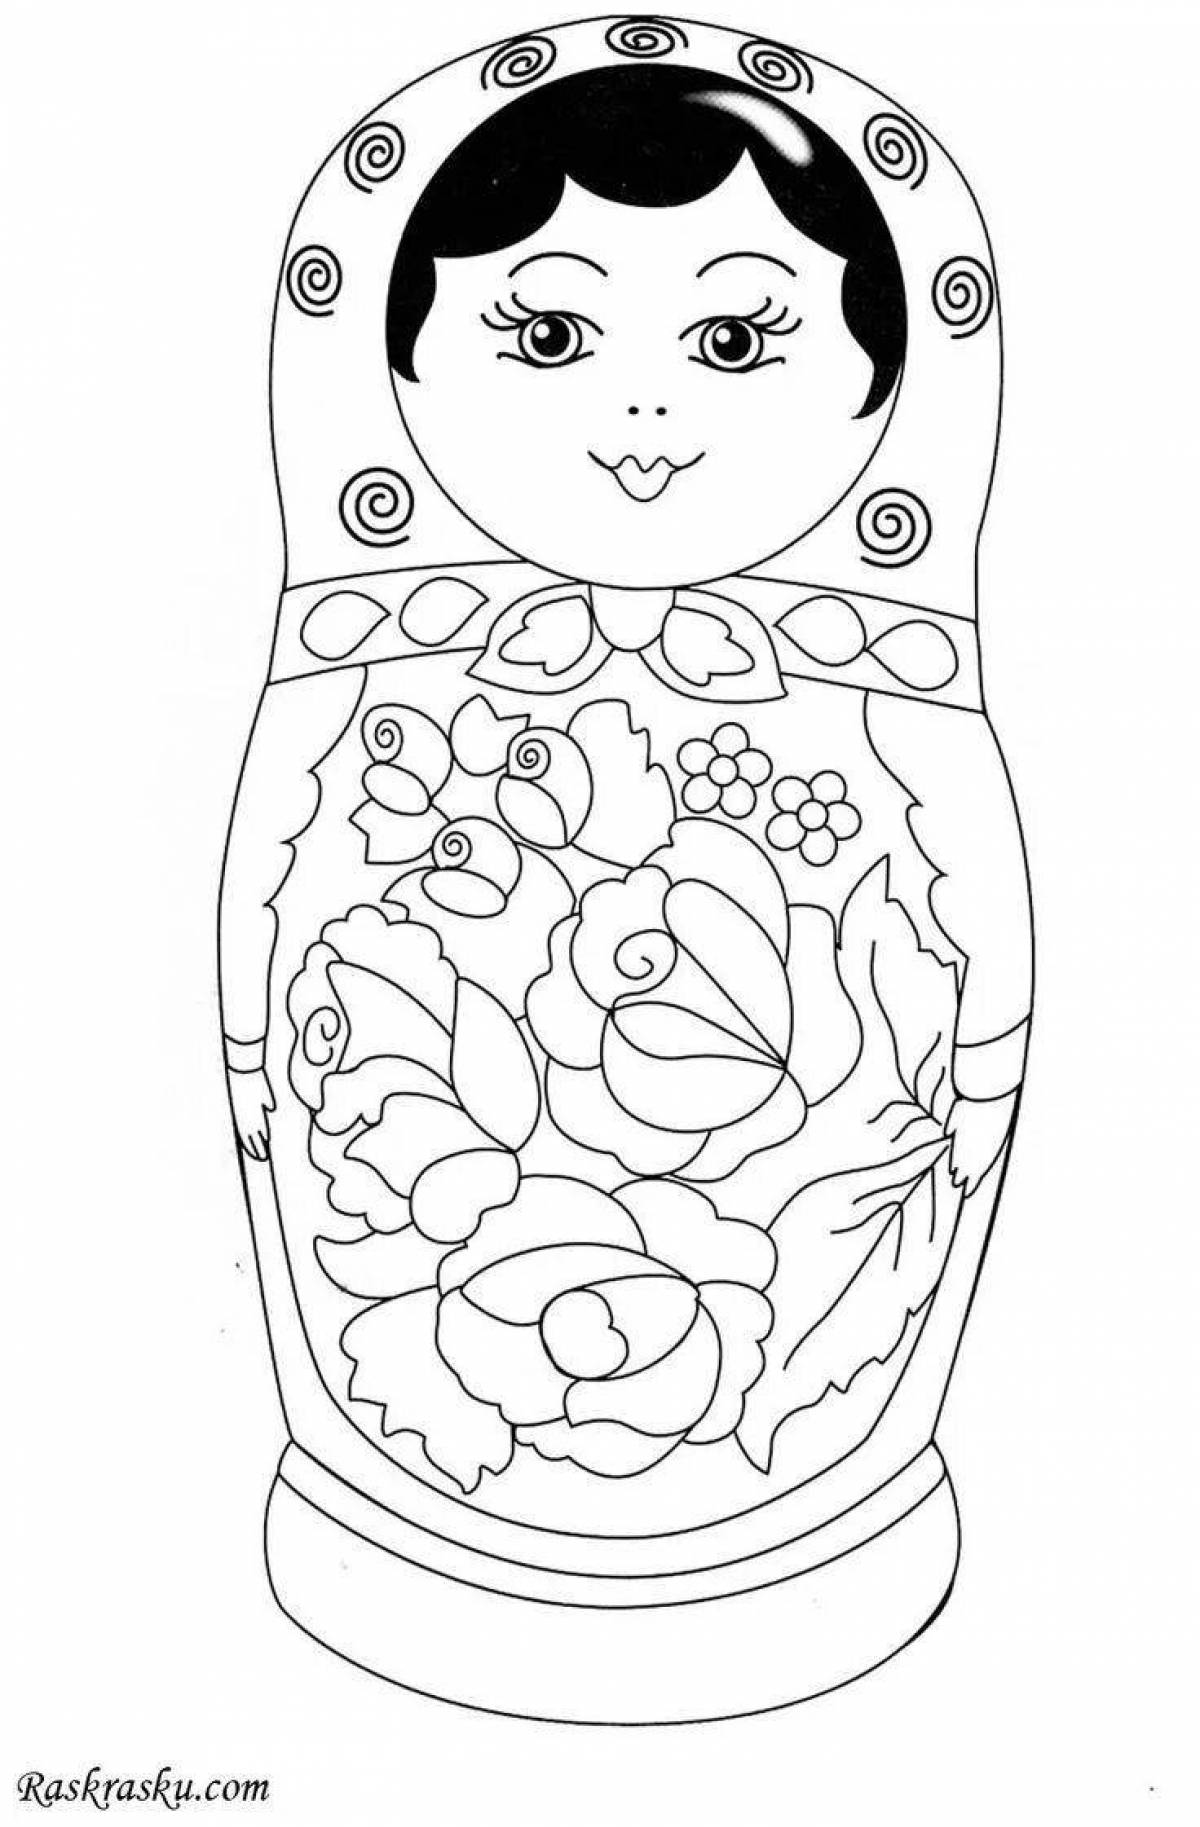 Dazzling Russian matryoshka coloring book for 6-7 year olds